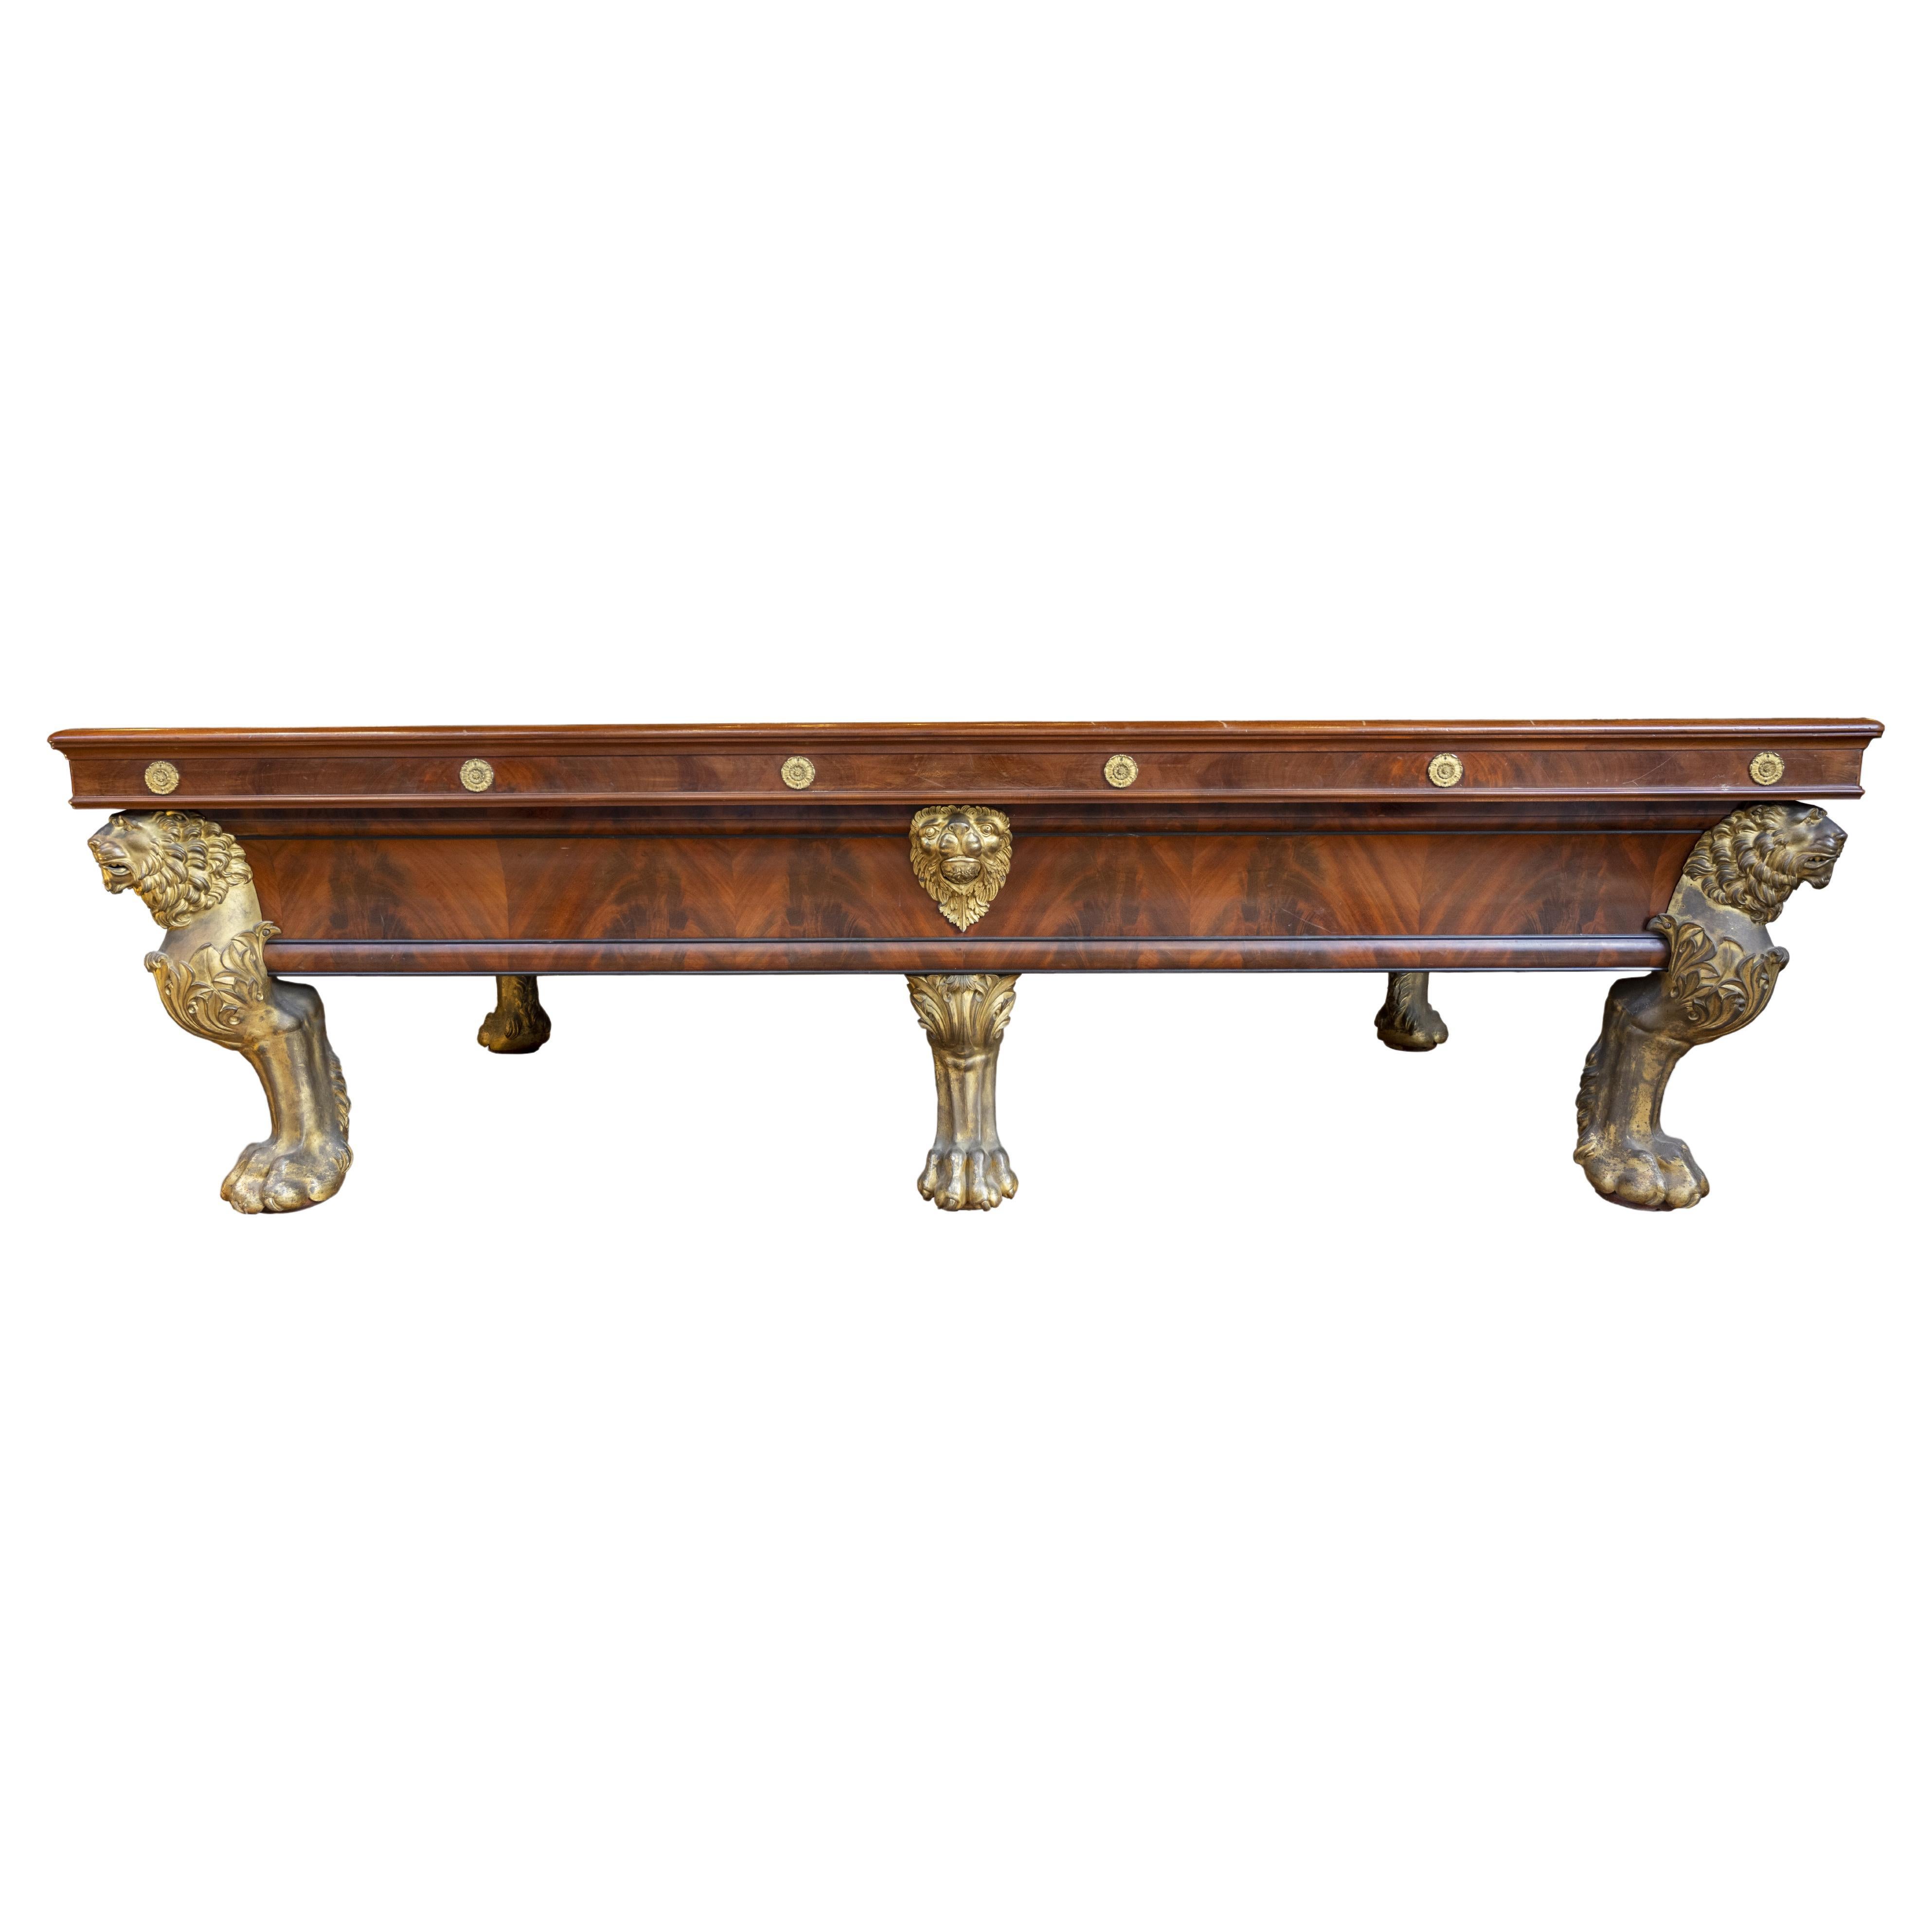 French Billiard Table with Lion Heads in Mahogany Veneer and Bronze Decorations